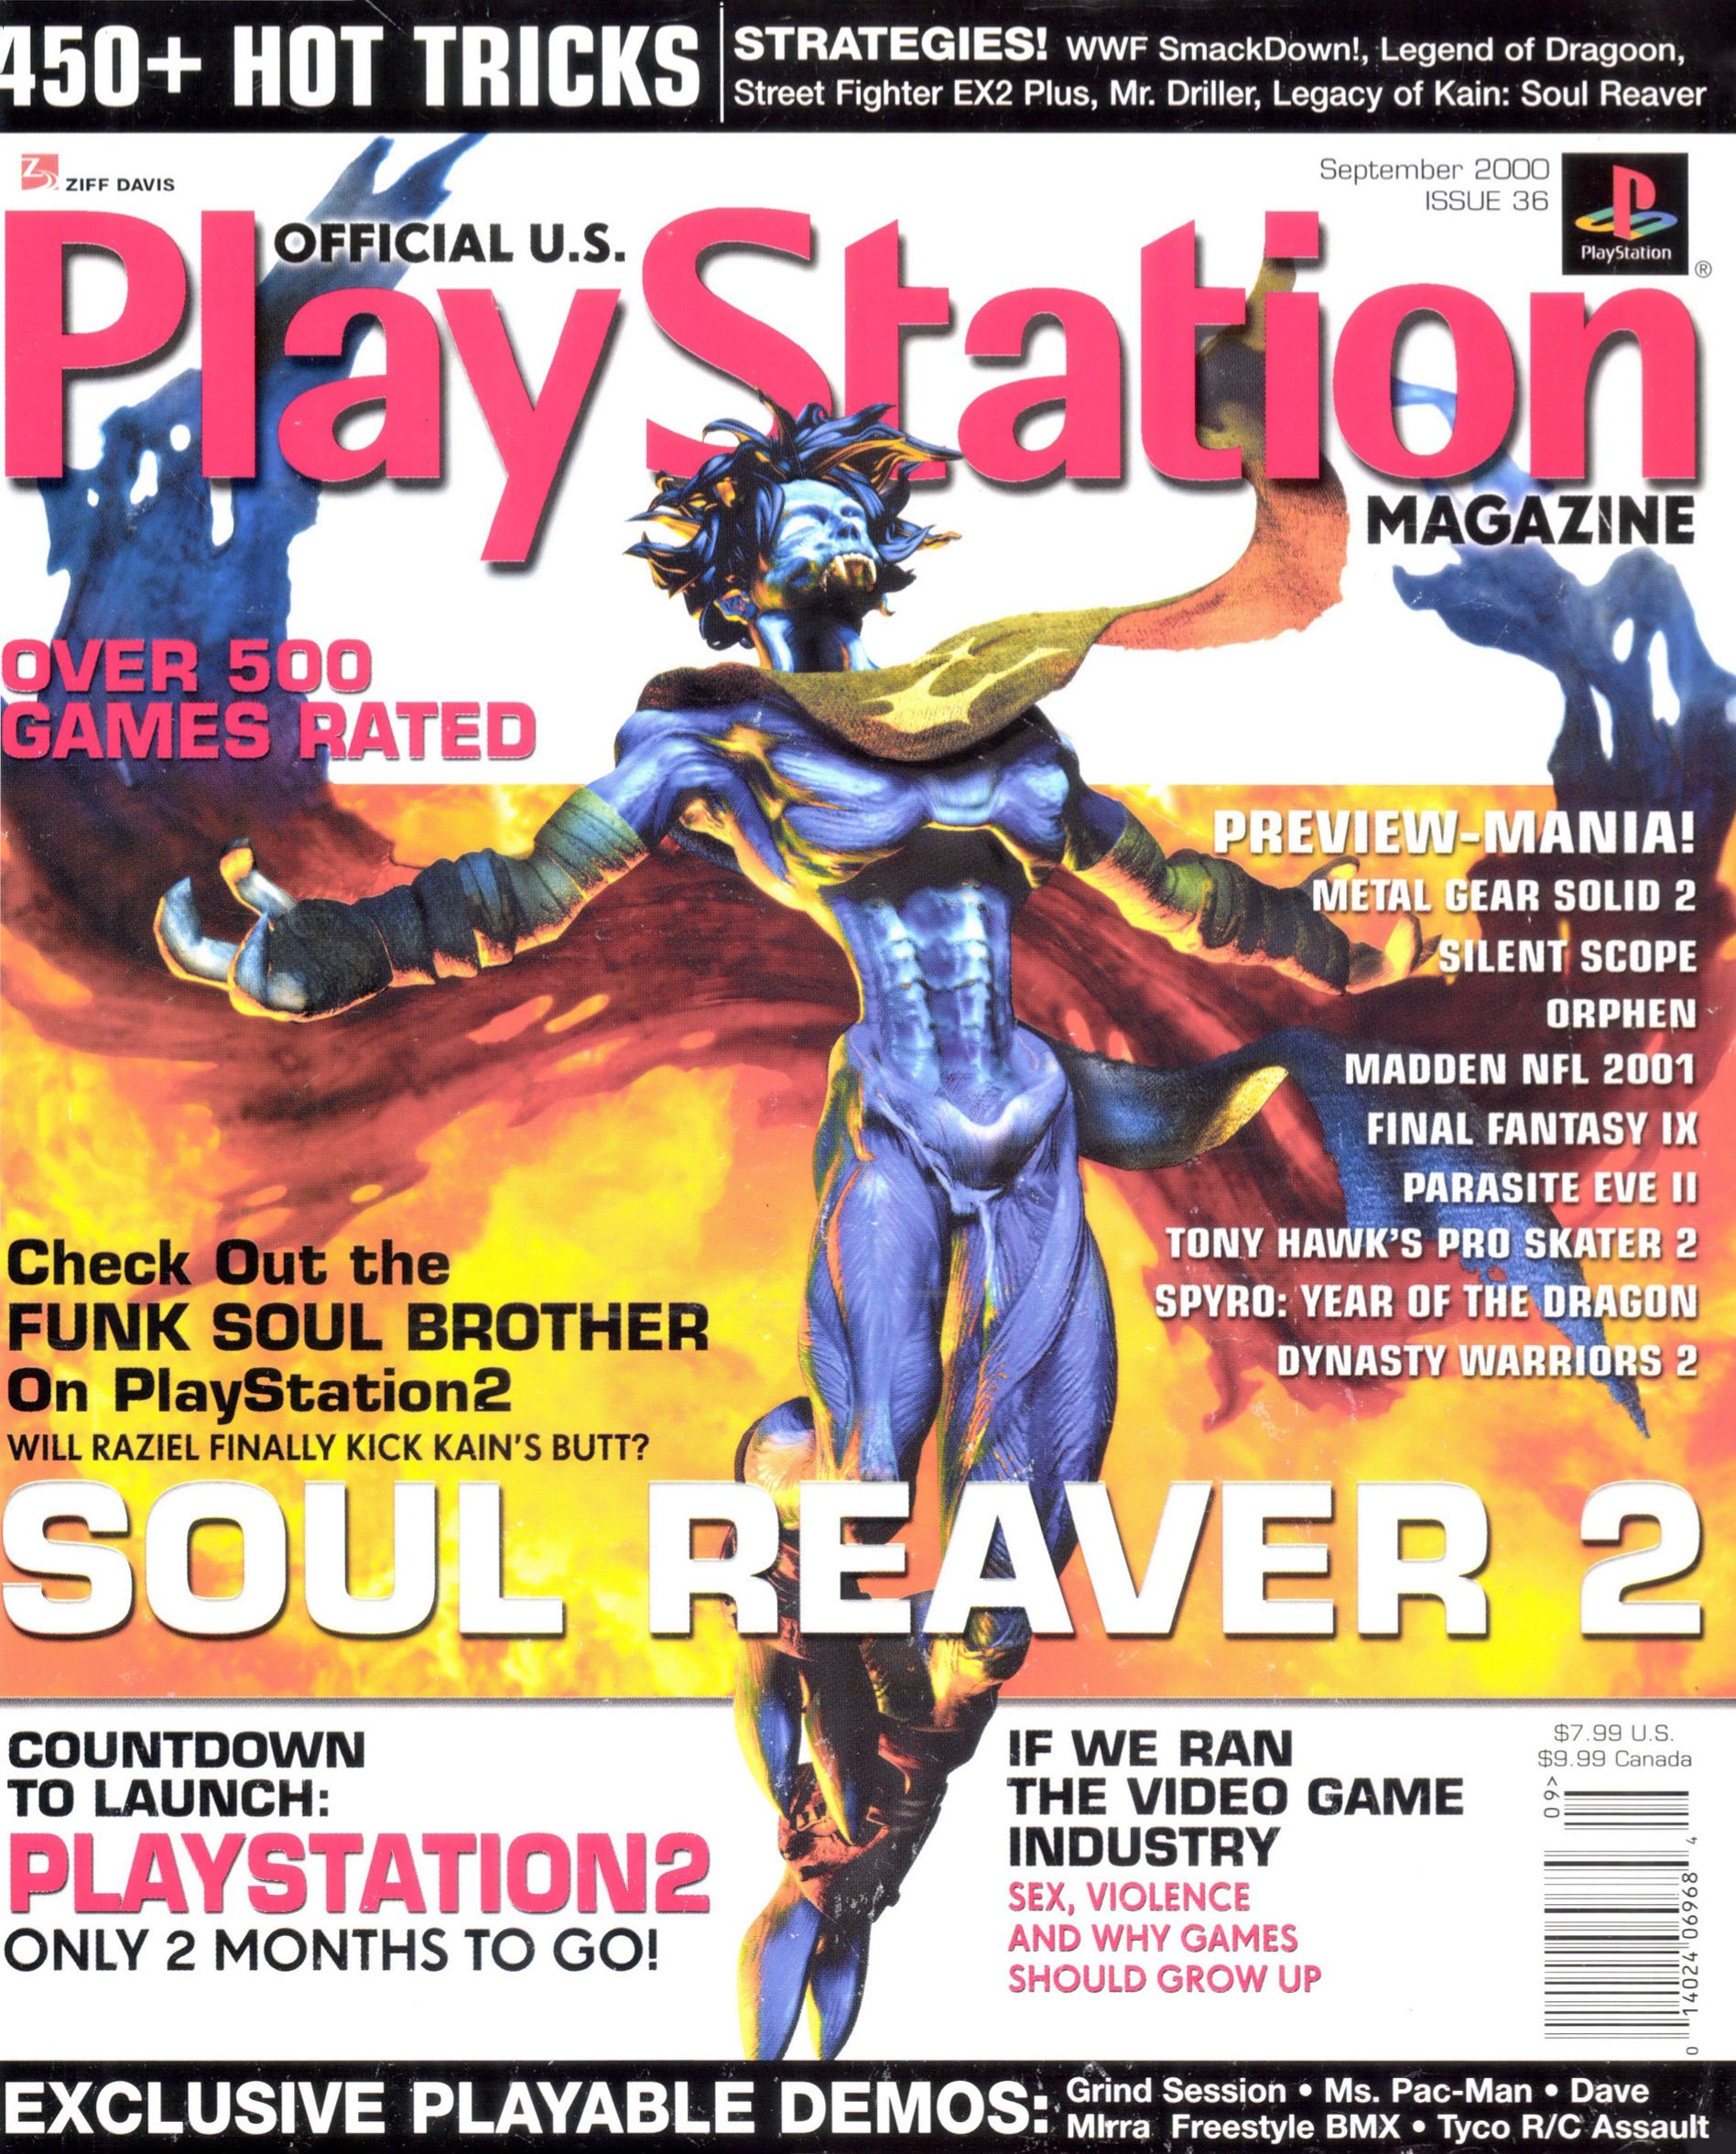 Official U.S. Playstation Magazine Issue 036 (September 2000)